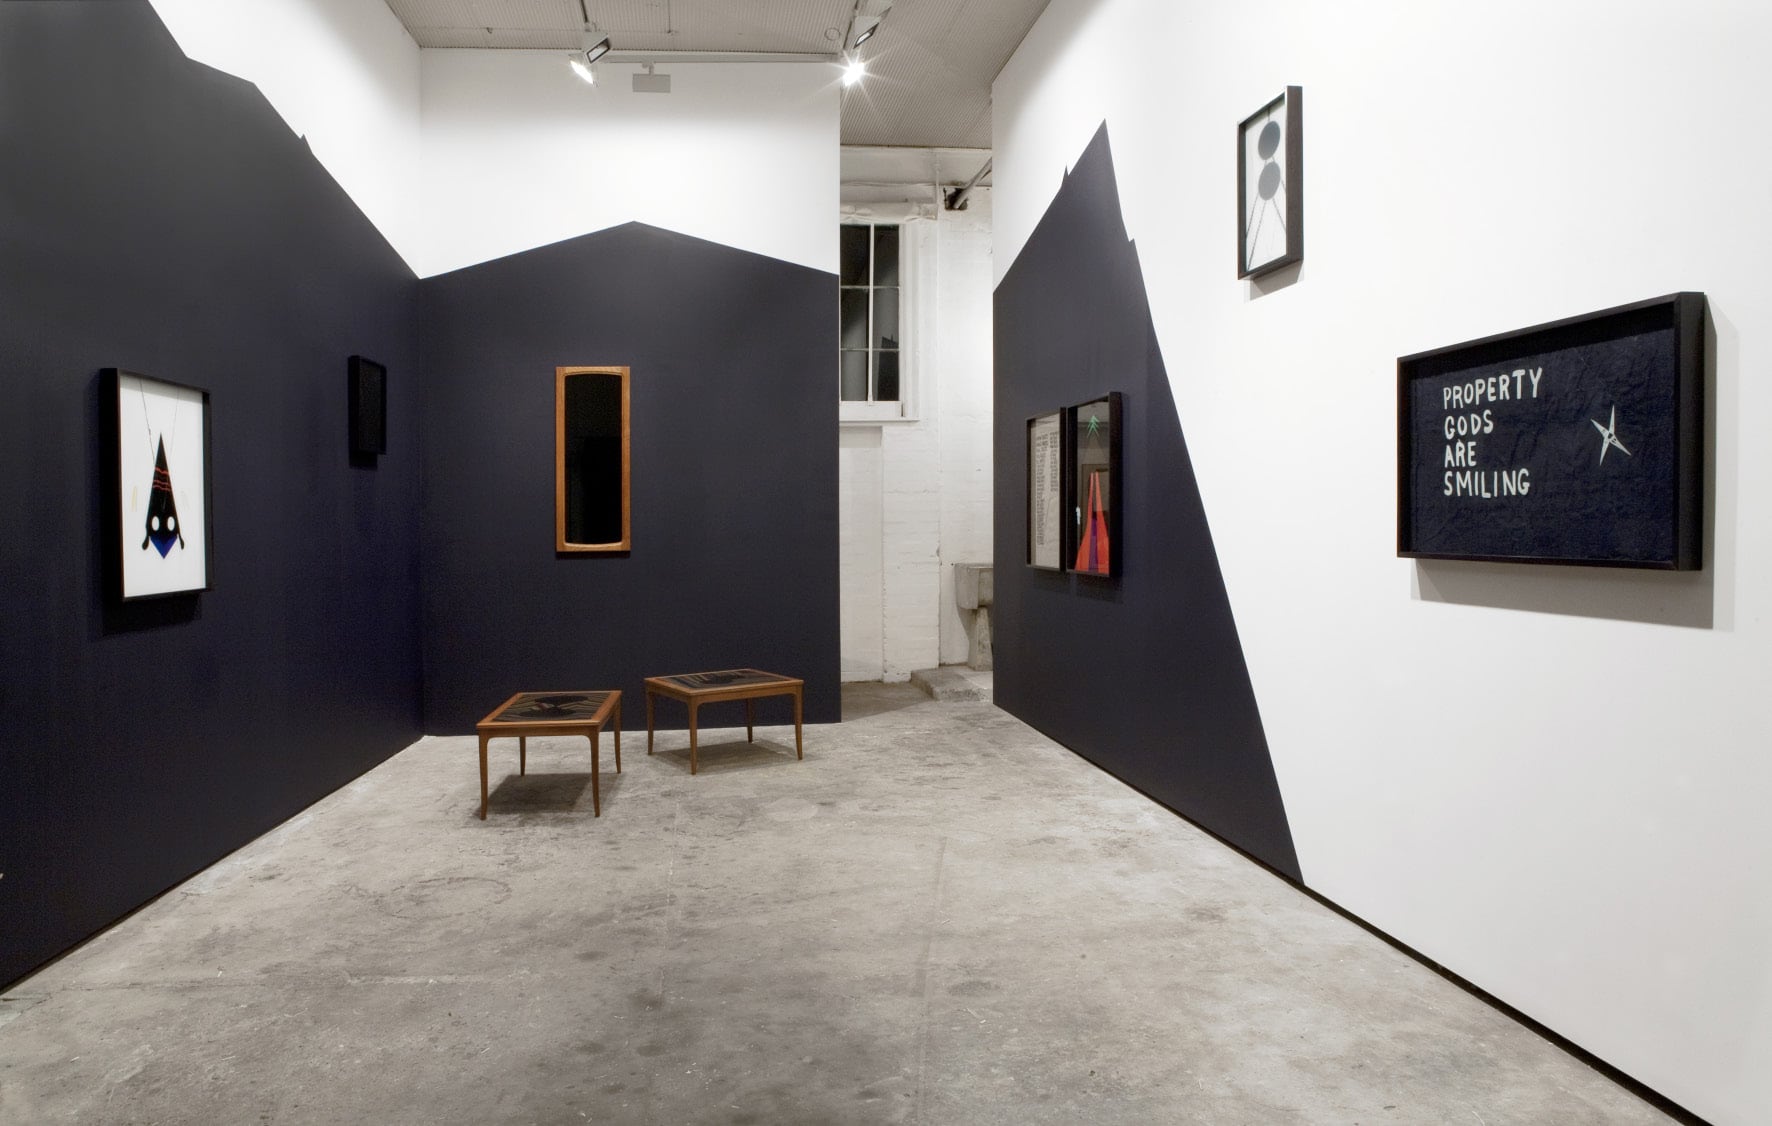 Clare Milledge, Motivated Reasoning: Strategic, Tactical, Operational 2013,installation view, image courtesy the artist and The Commercial Gallery, Sydney, photograph: Jessica Maurer